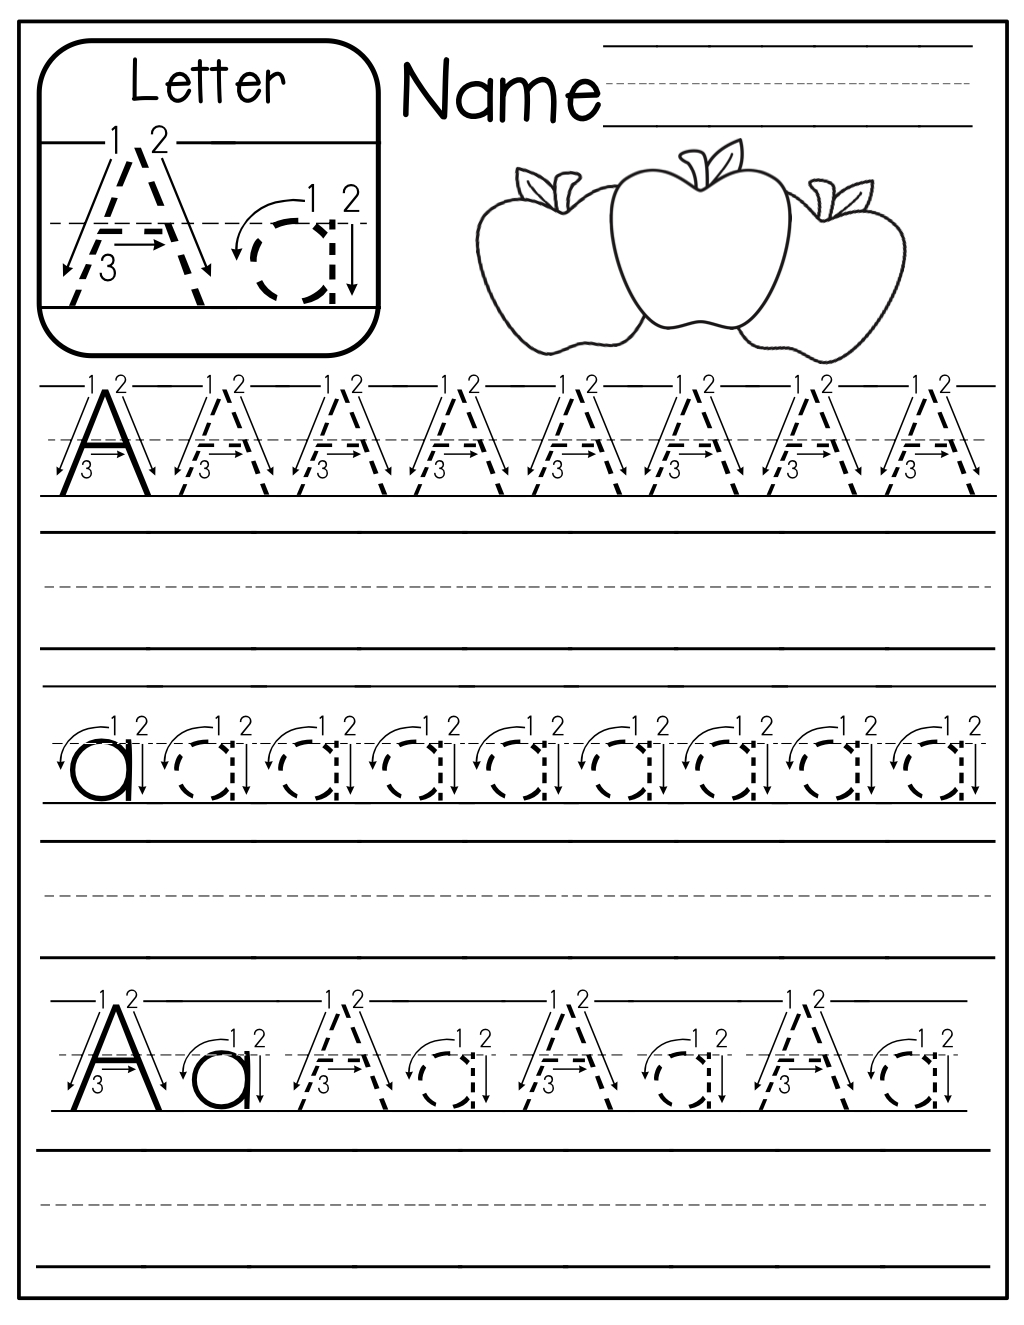 free-printable-tracing-alphabet-letters-a-z-letter-tracing-worksheets